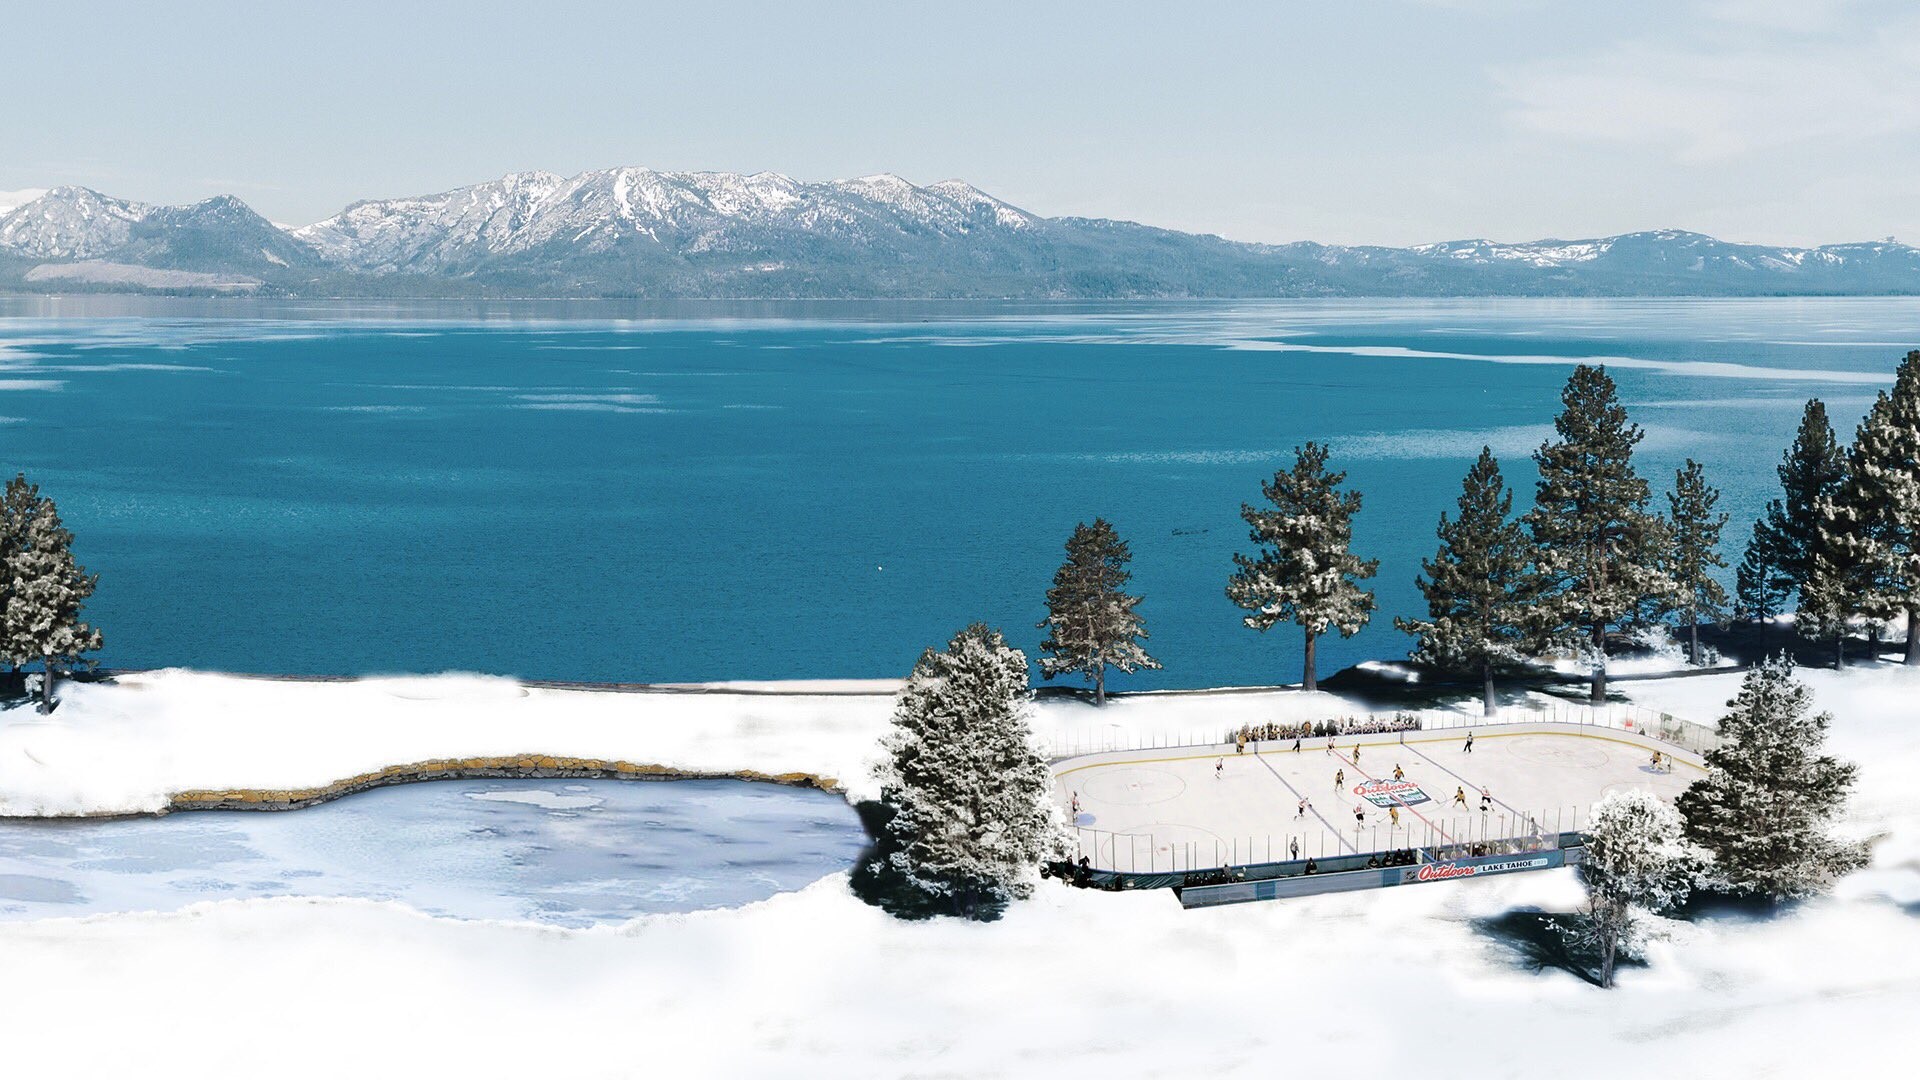 The NHL and Lake Tahoe are partnering up to continue on a tradition of outdoor hockey games. Both games will be played without spectators, according to the NHL.